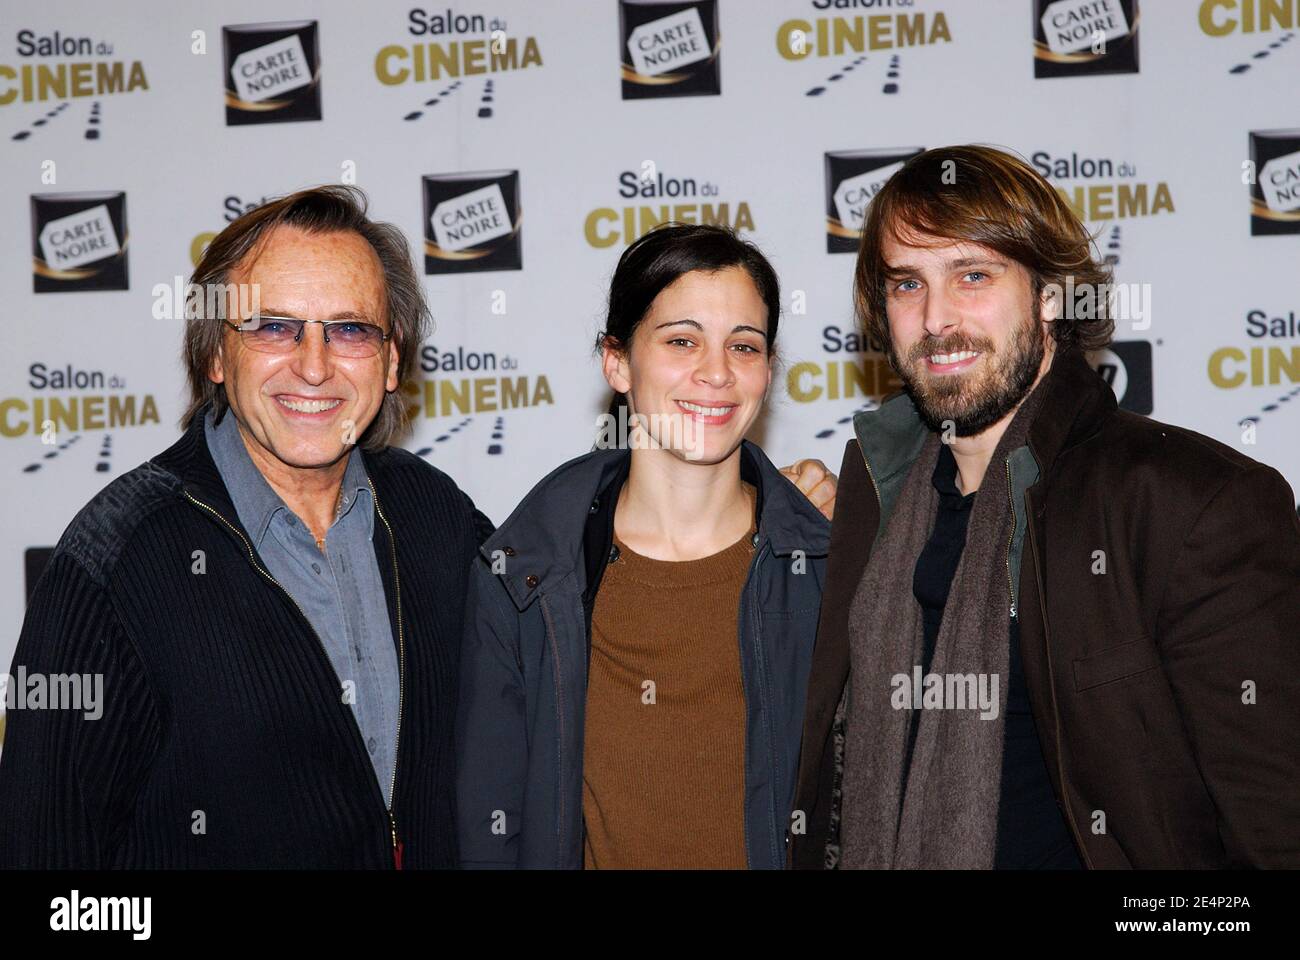 Alexandre Arcady poses with his son Director Alexandre Aja and his wife  during the 2nd Salon du Cinema held at the Porte de Versailles in Paris,  France on January 20, 2008. Photo